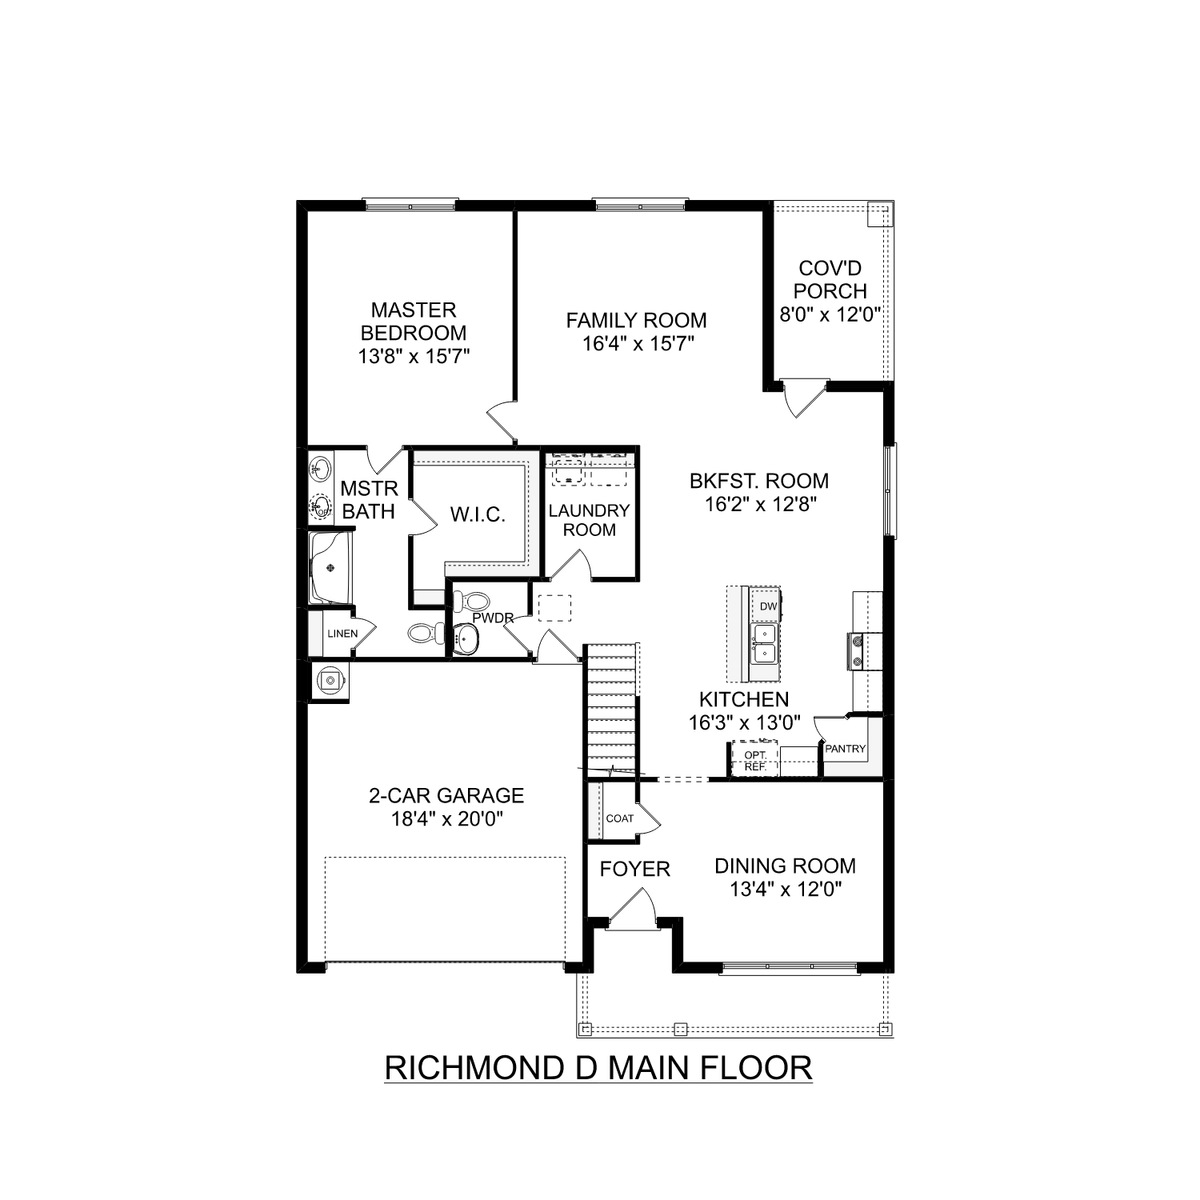 1 - The Richmond D floor plan layout for 24575 Beacon Circle in Davidson Homes' Old Stone community.